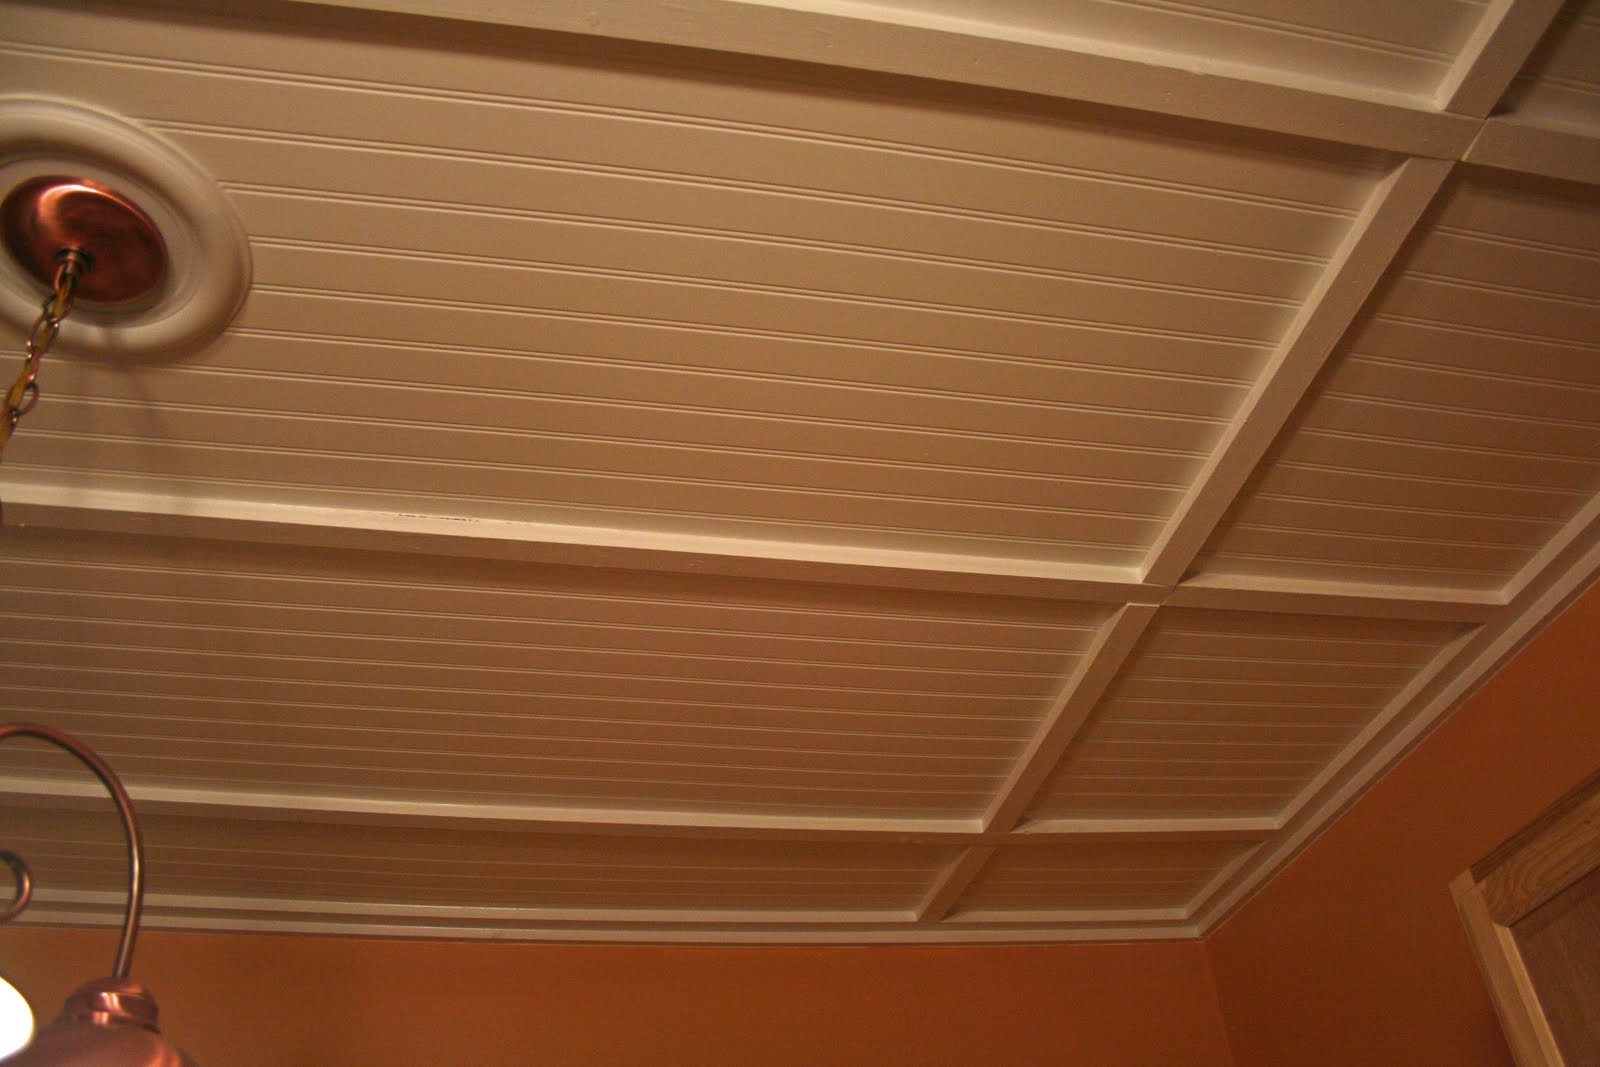 Wood Look Suspended Ceiling Tileswood drop in ceiling tiles new basement and tile ideasmetatitle